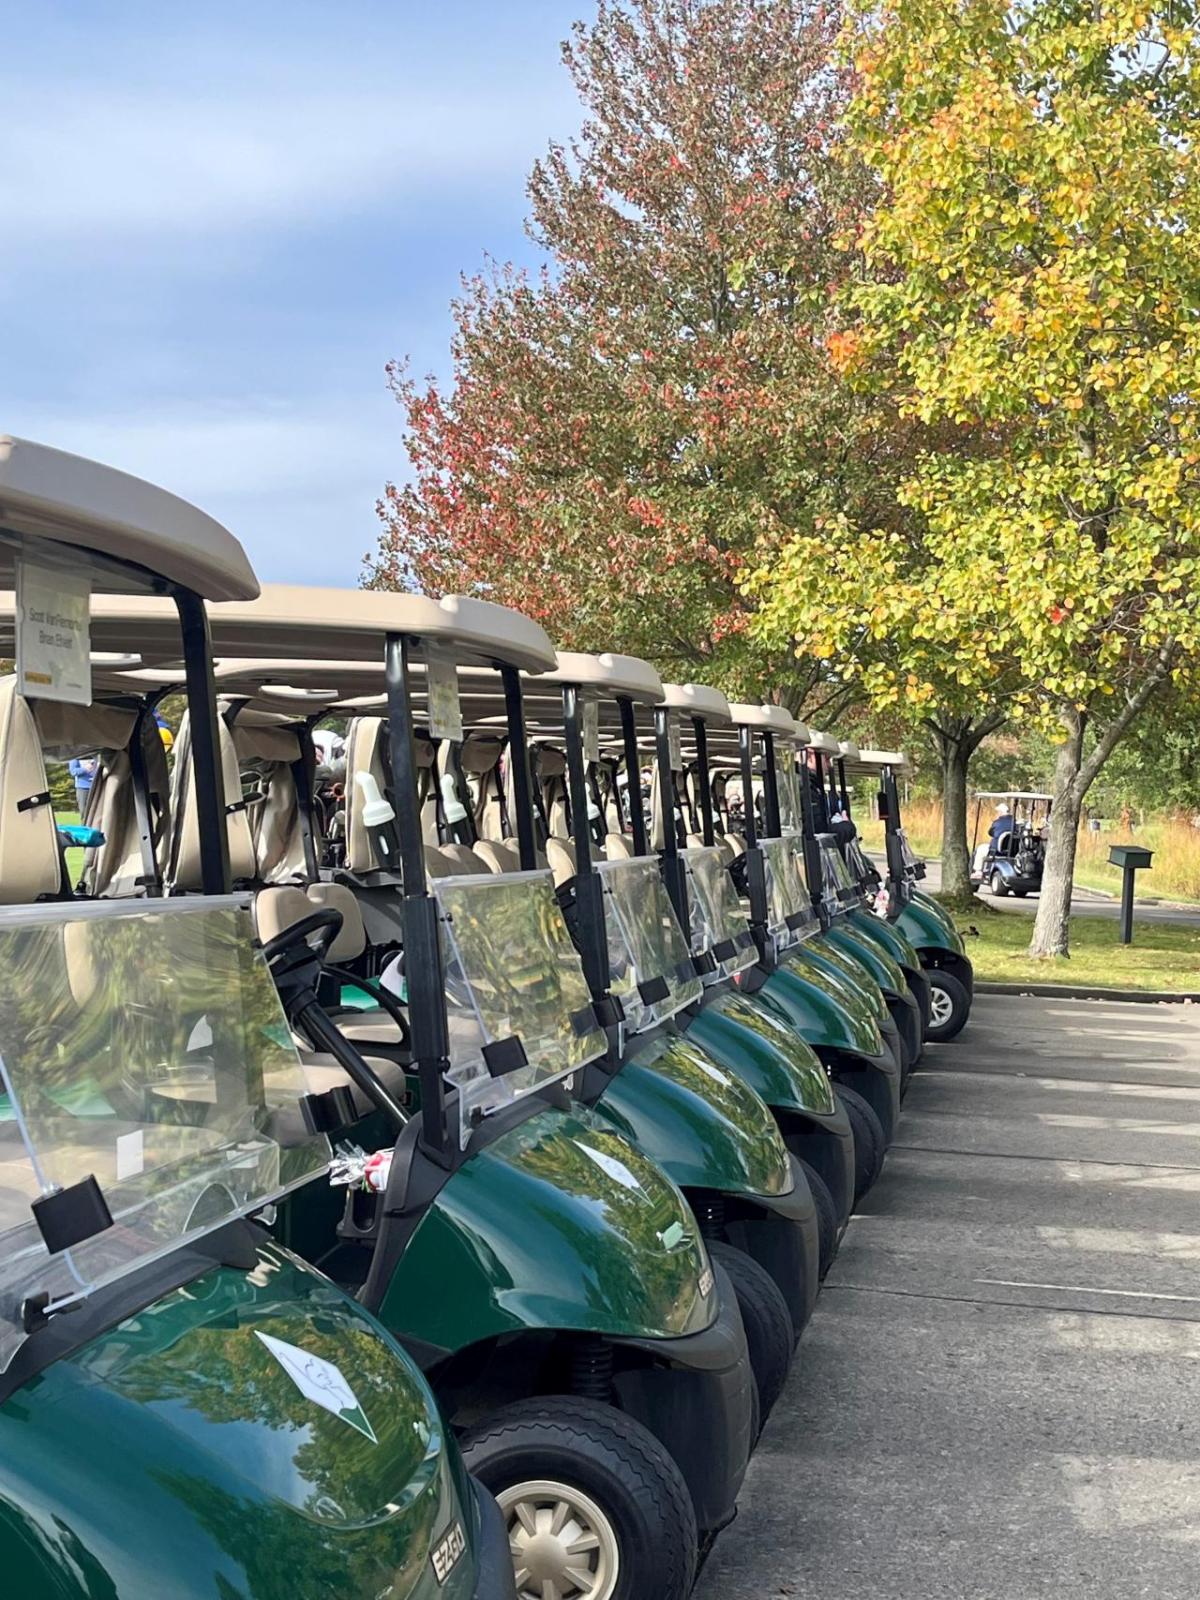 A row of parked green golf carts outside.